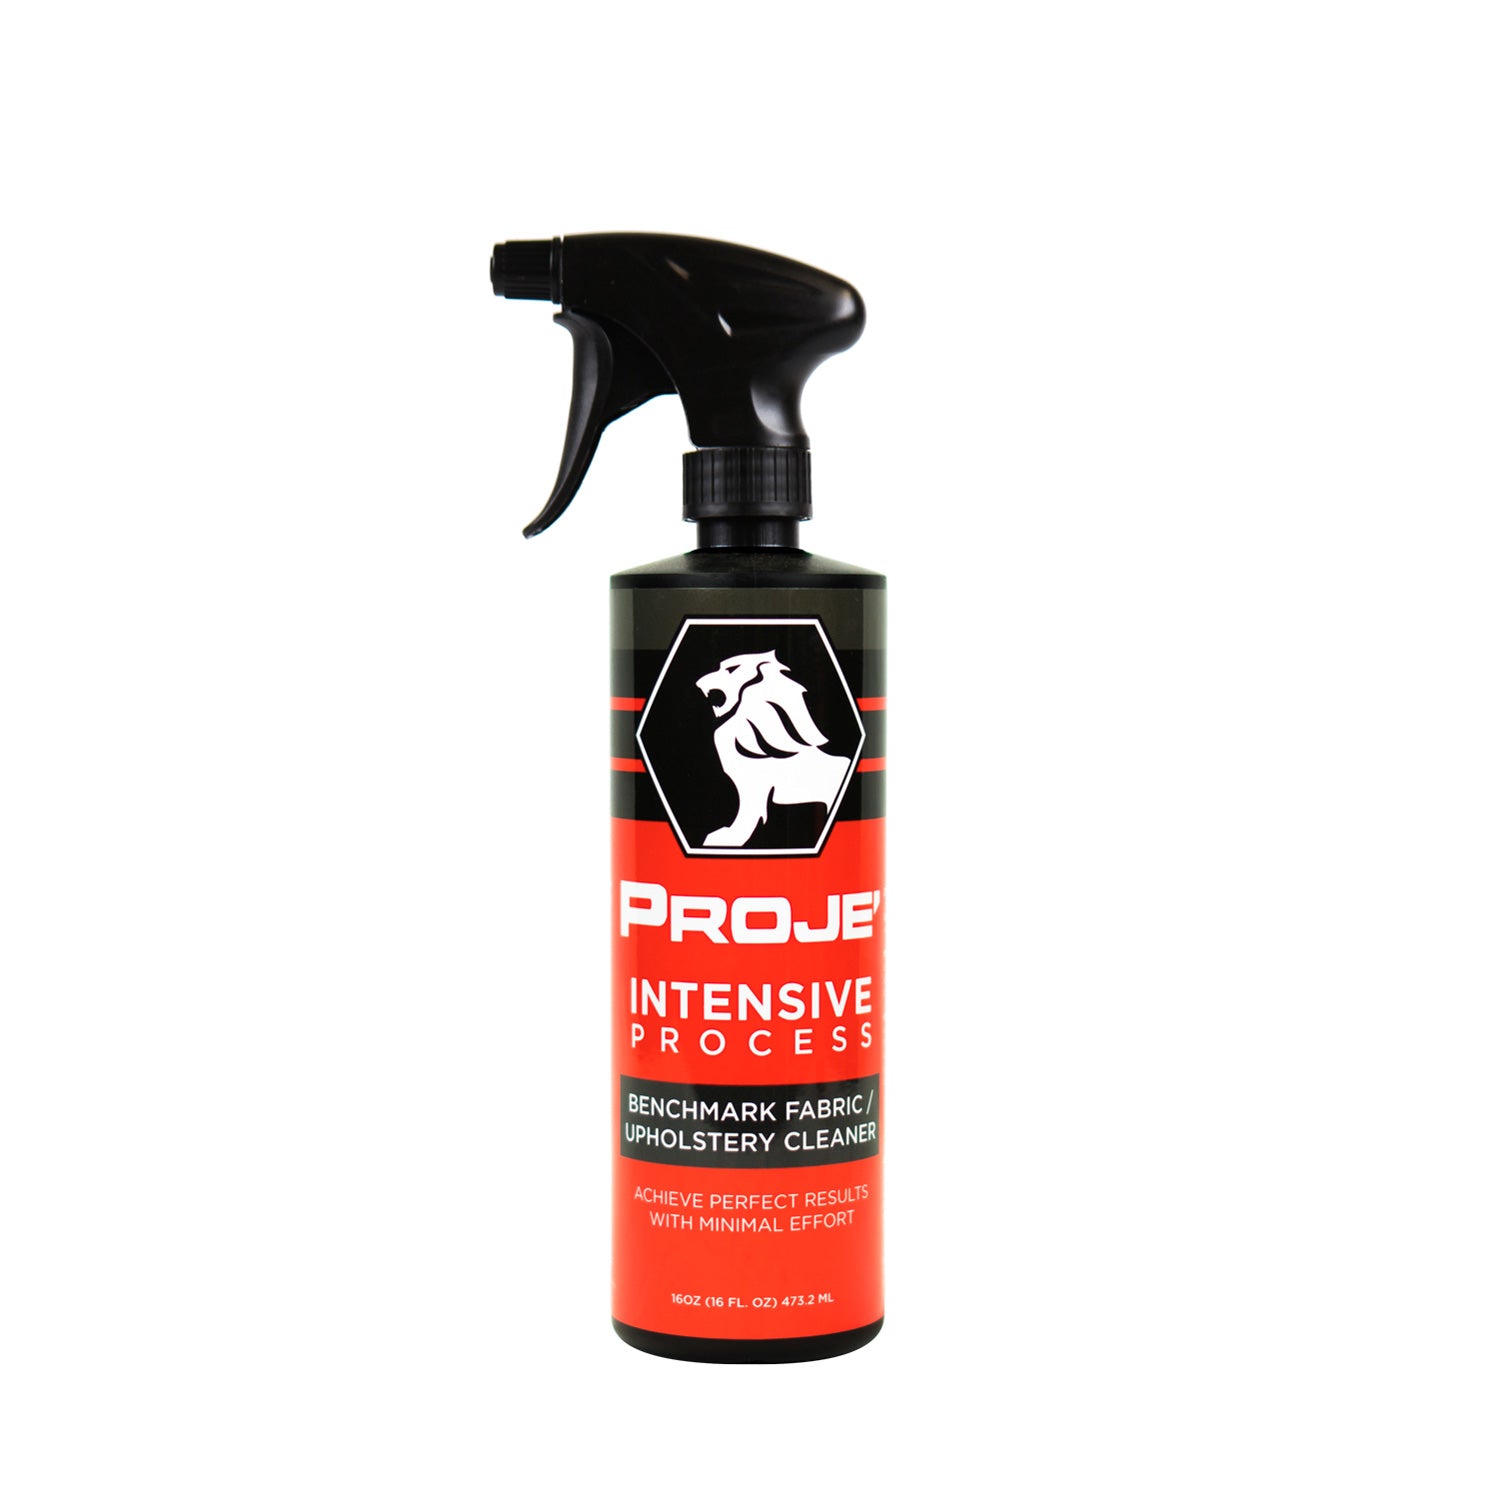 Proje Premium Car Care 30003 Fabric & Upholstery Cleaner 16 oz - Stain